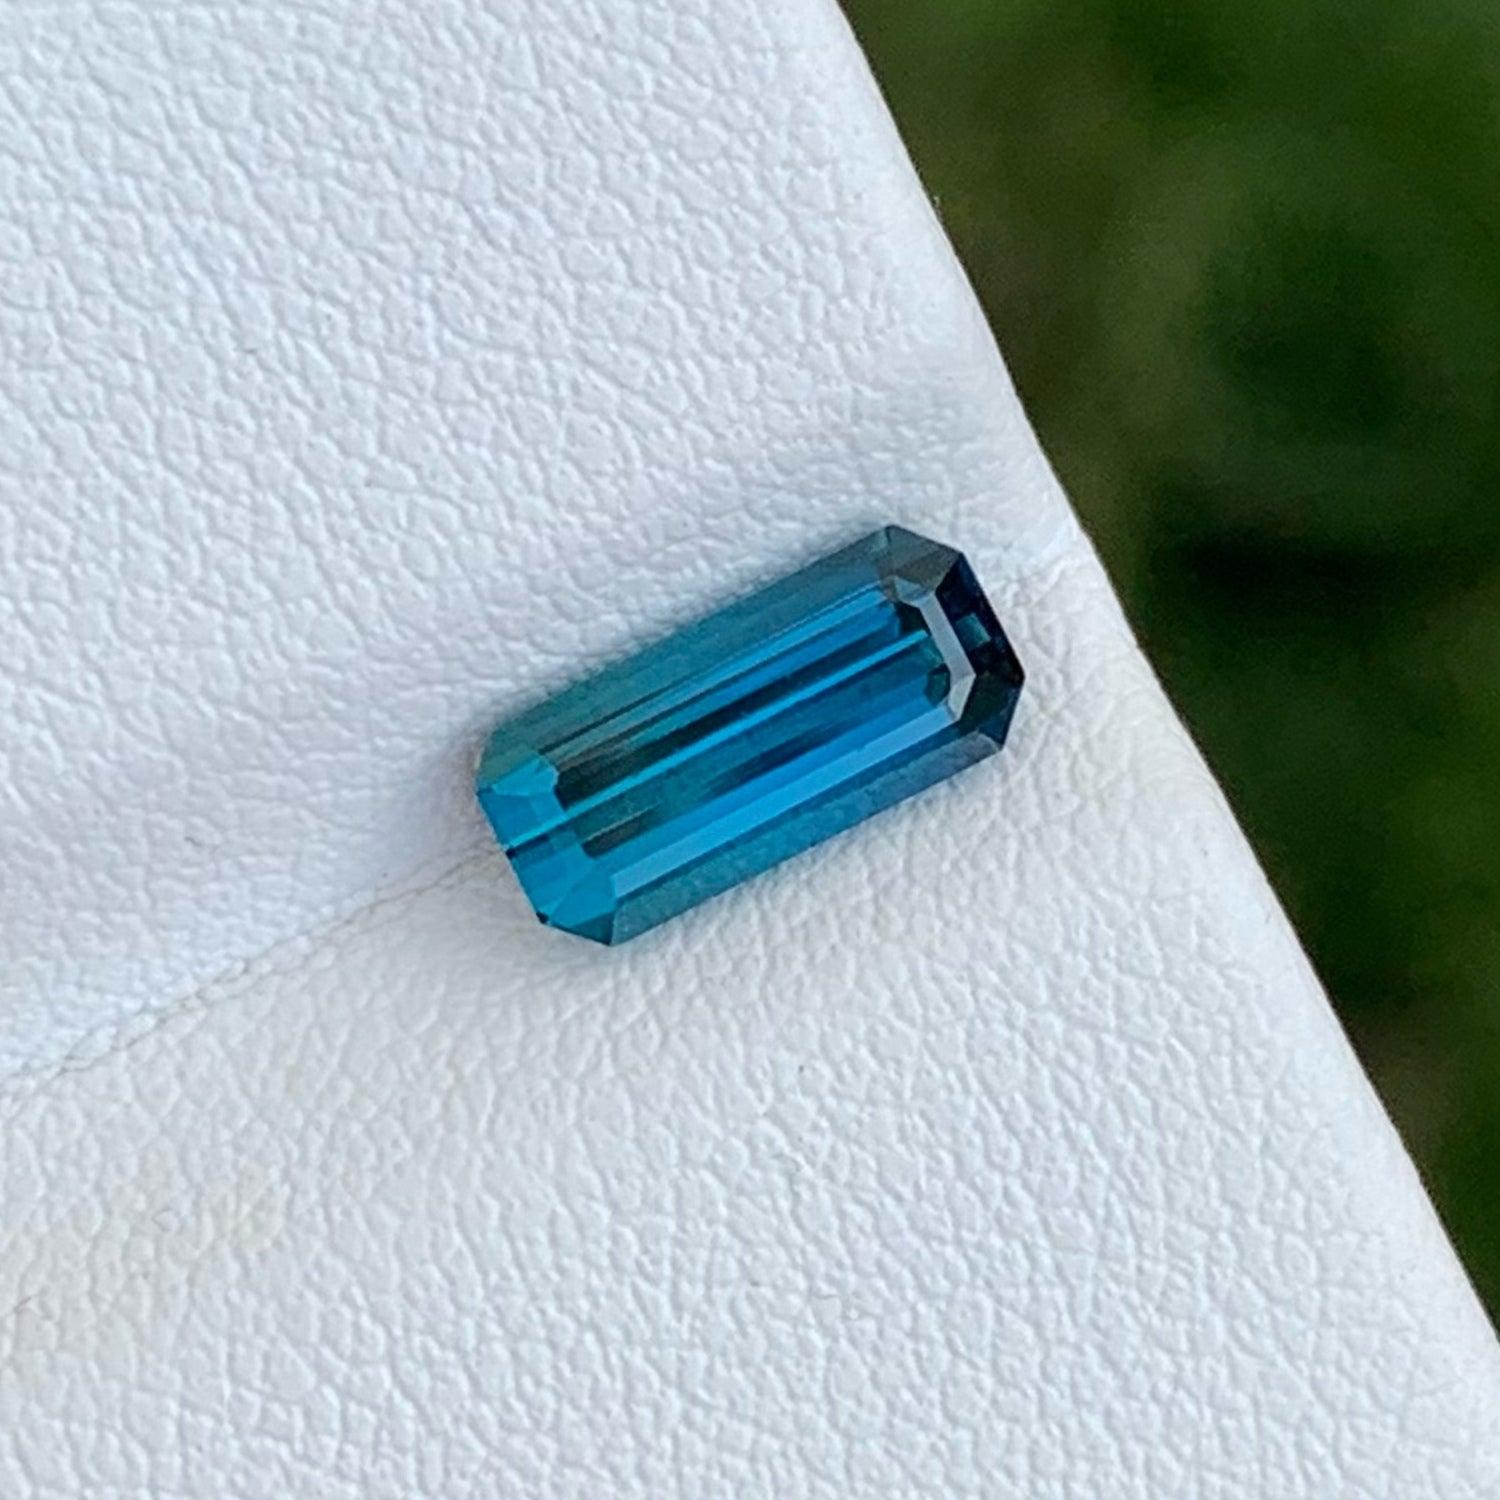 Natural Ink Blue Tourmaline For Jewelry, available For Sale At Wholesale Price Natural High Quality 1.35 Carats Loupe Clean Clarity Natural Loose Tourmaline From Afghanistan. 
Product Information:
GEMSTONE NAME: Natural Ink Blue Tourmaline For